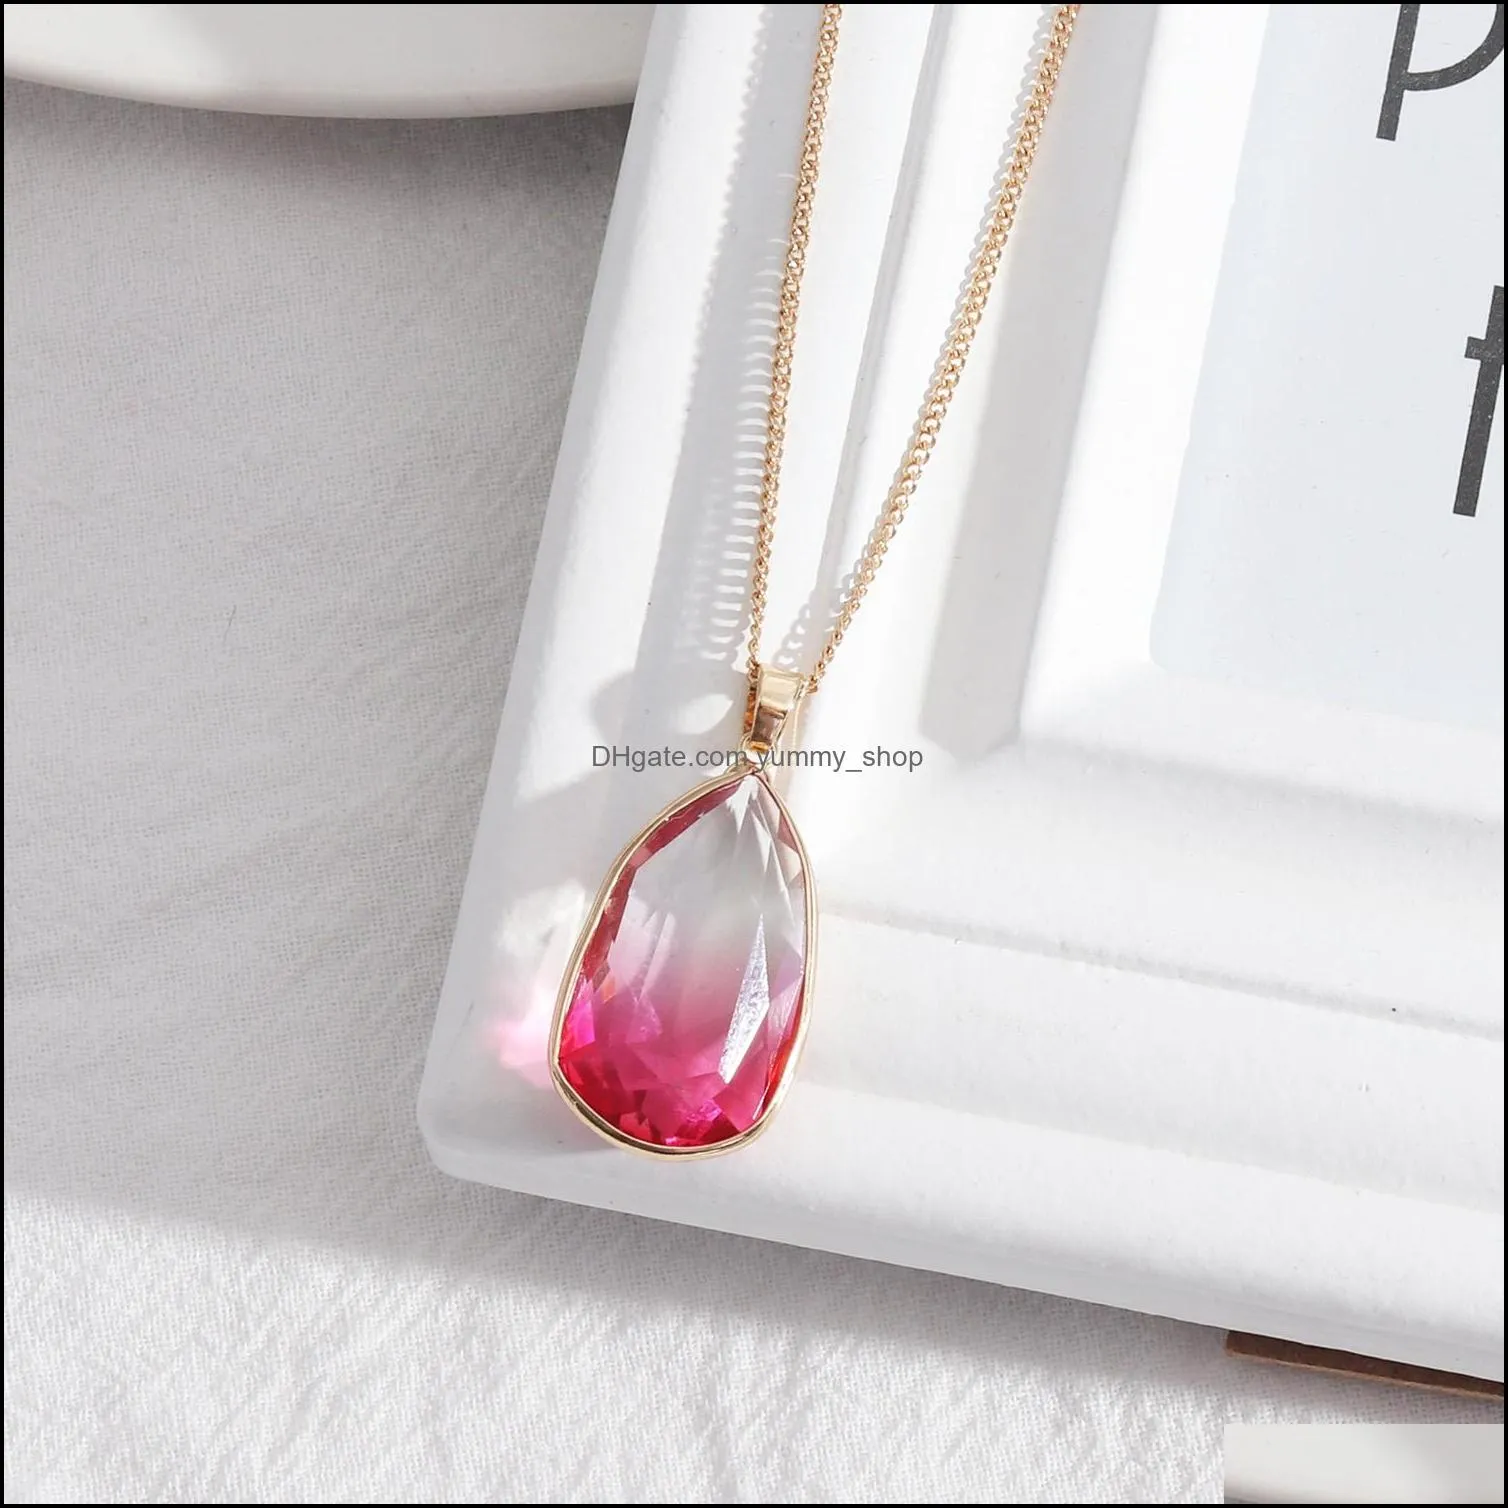 waterdrop facet colorful glass pendant necklaces geometric charms 50cm gold chain accessories body jewelry